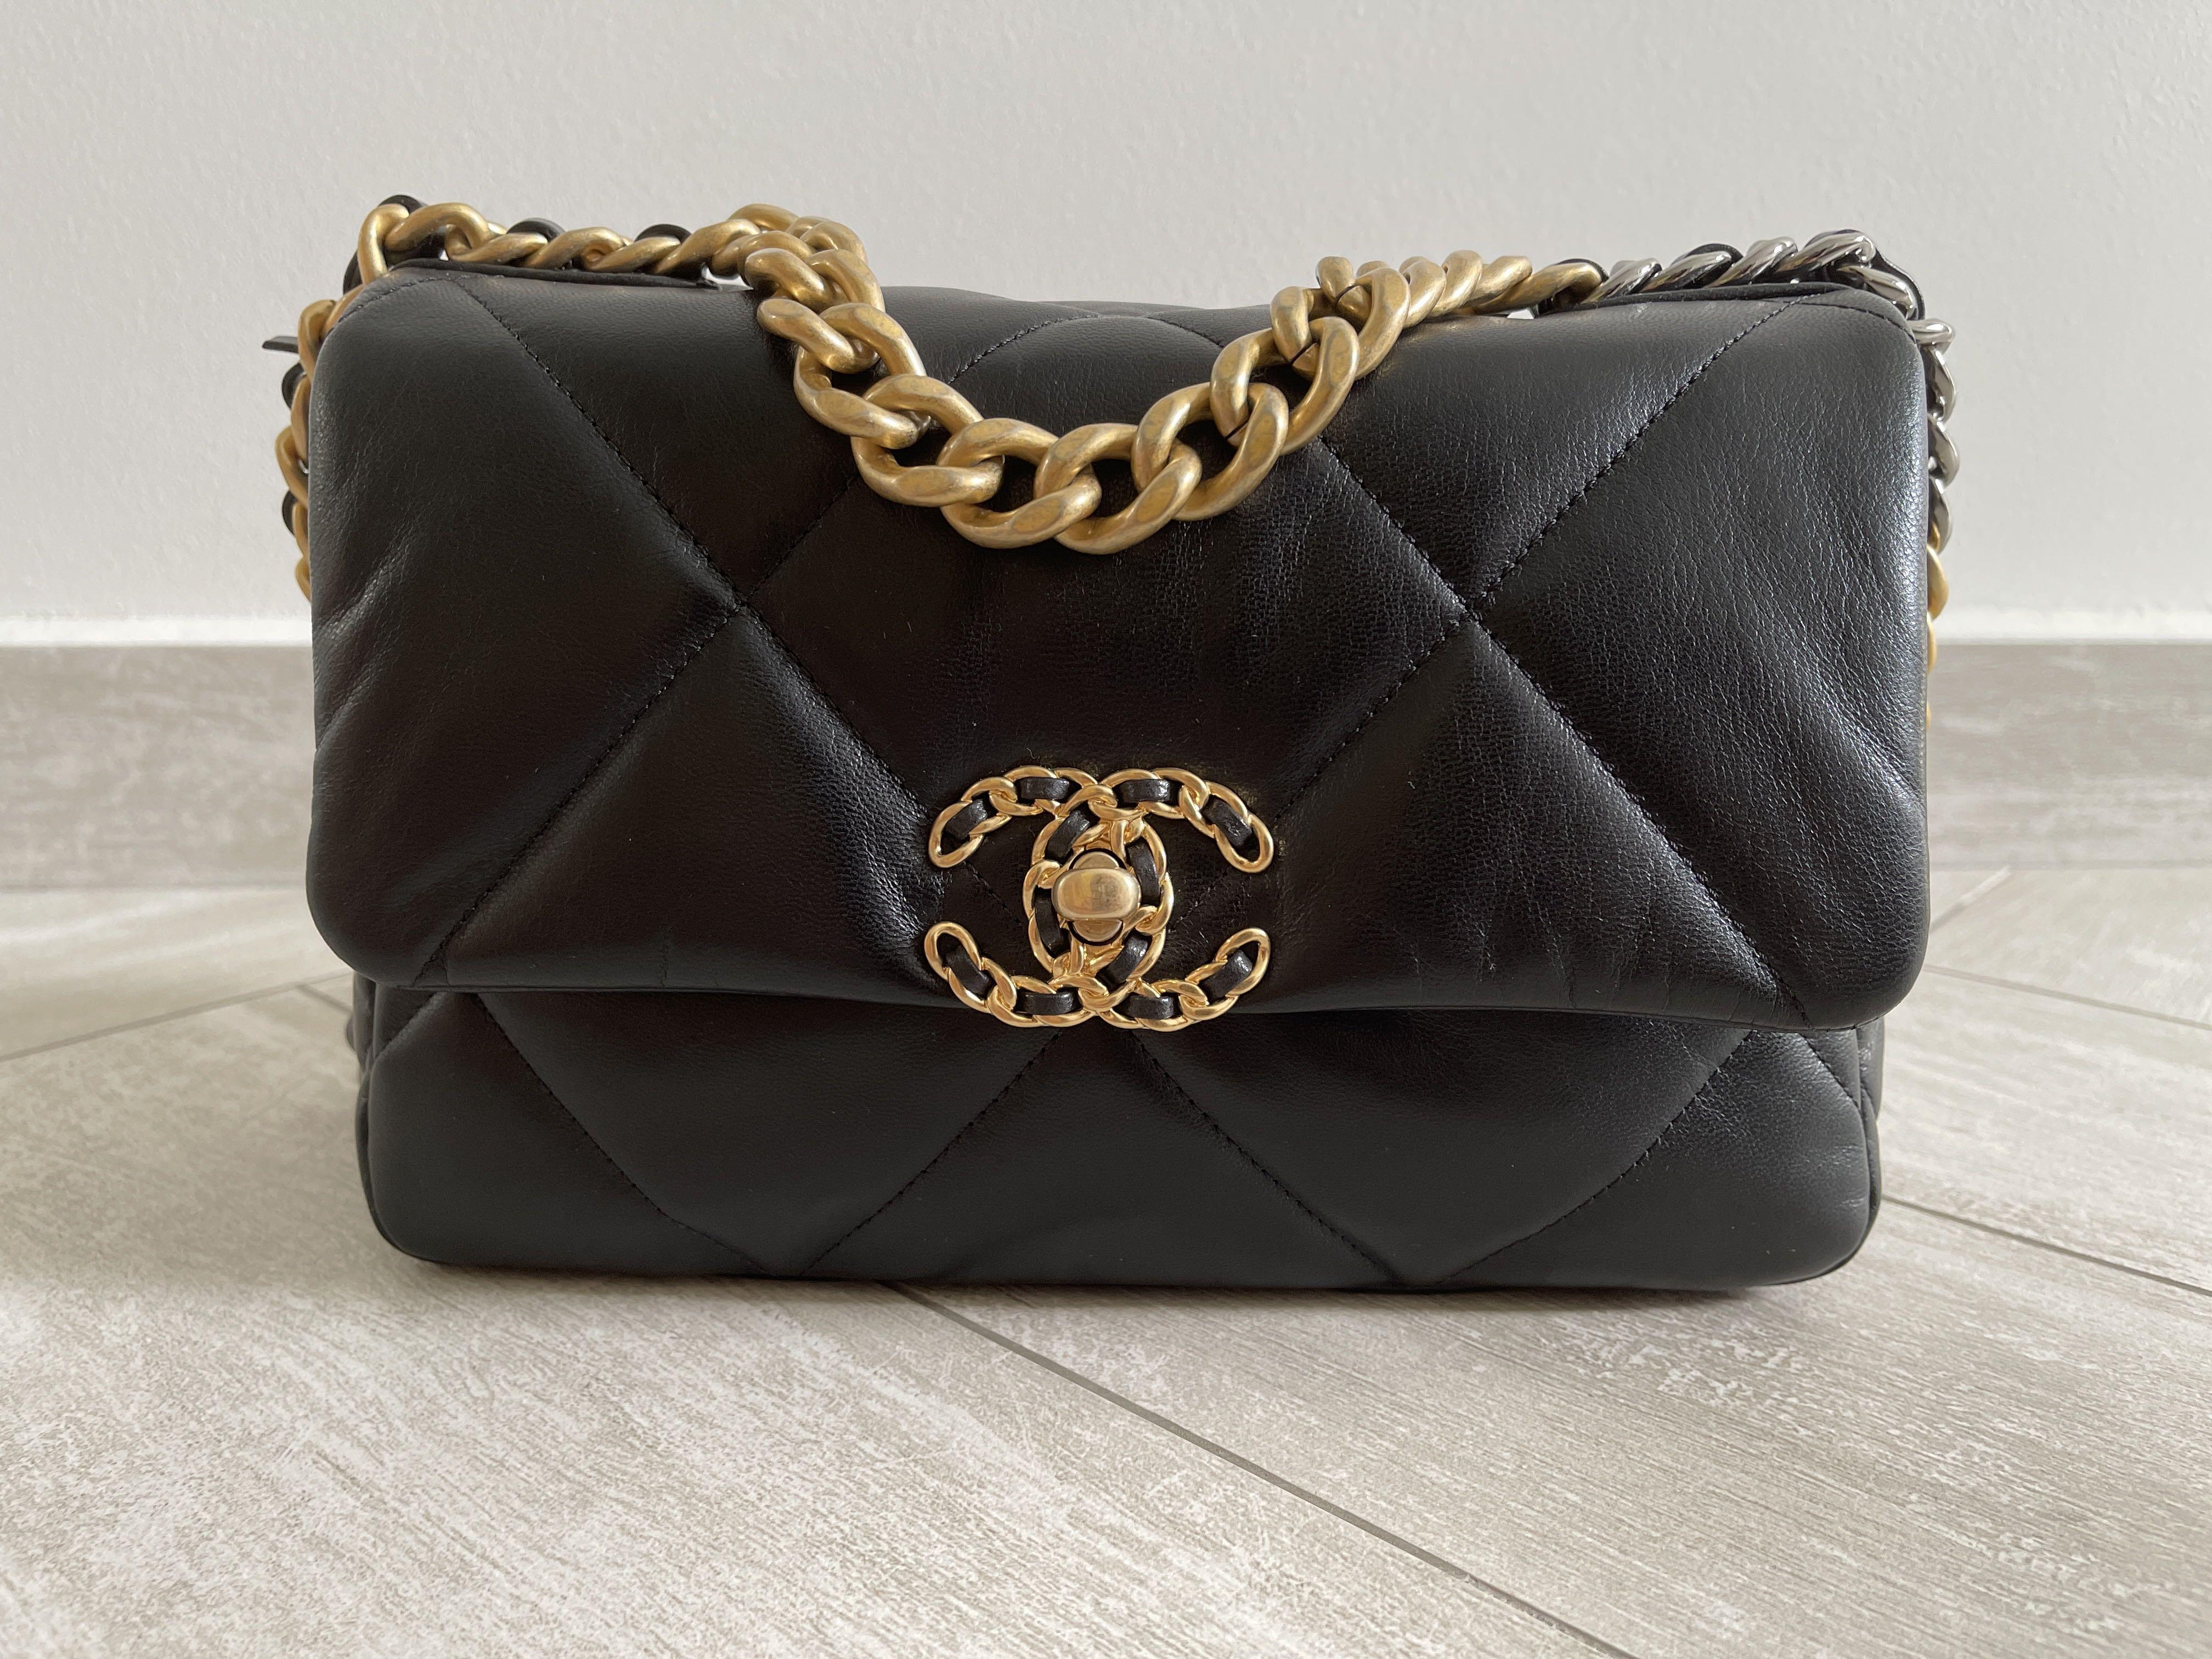 Chanel 19 Small in Black GHW, Goatskin Leather